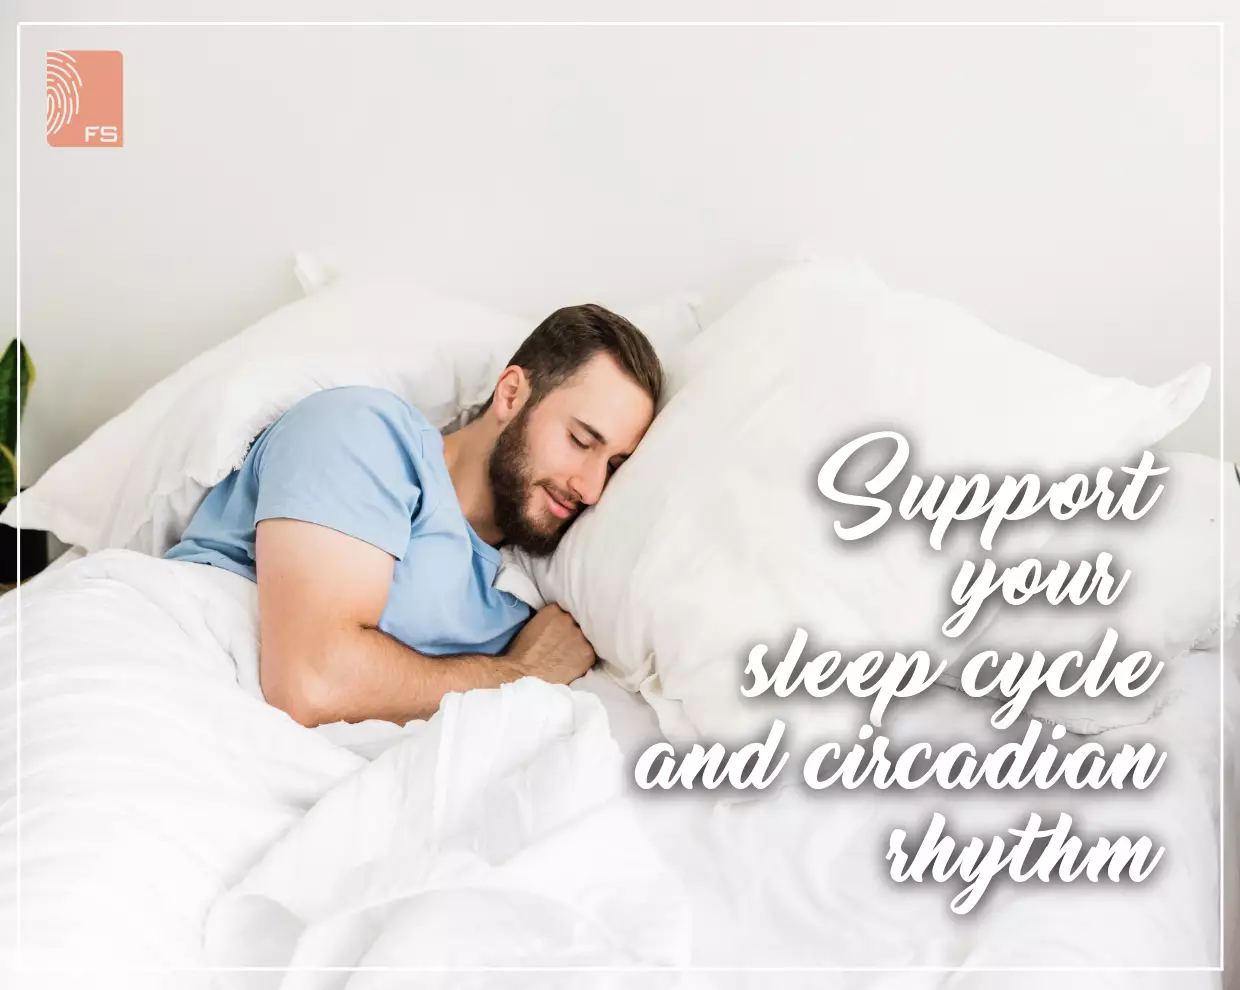 Support your sleep cycle and circadian rhythm